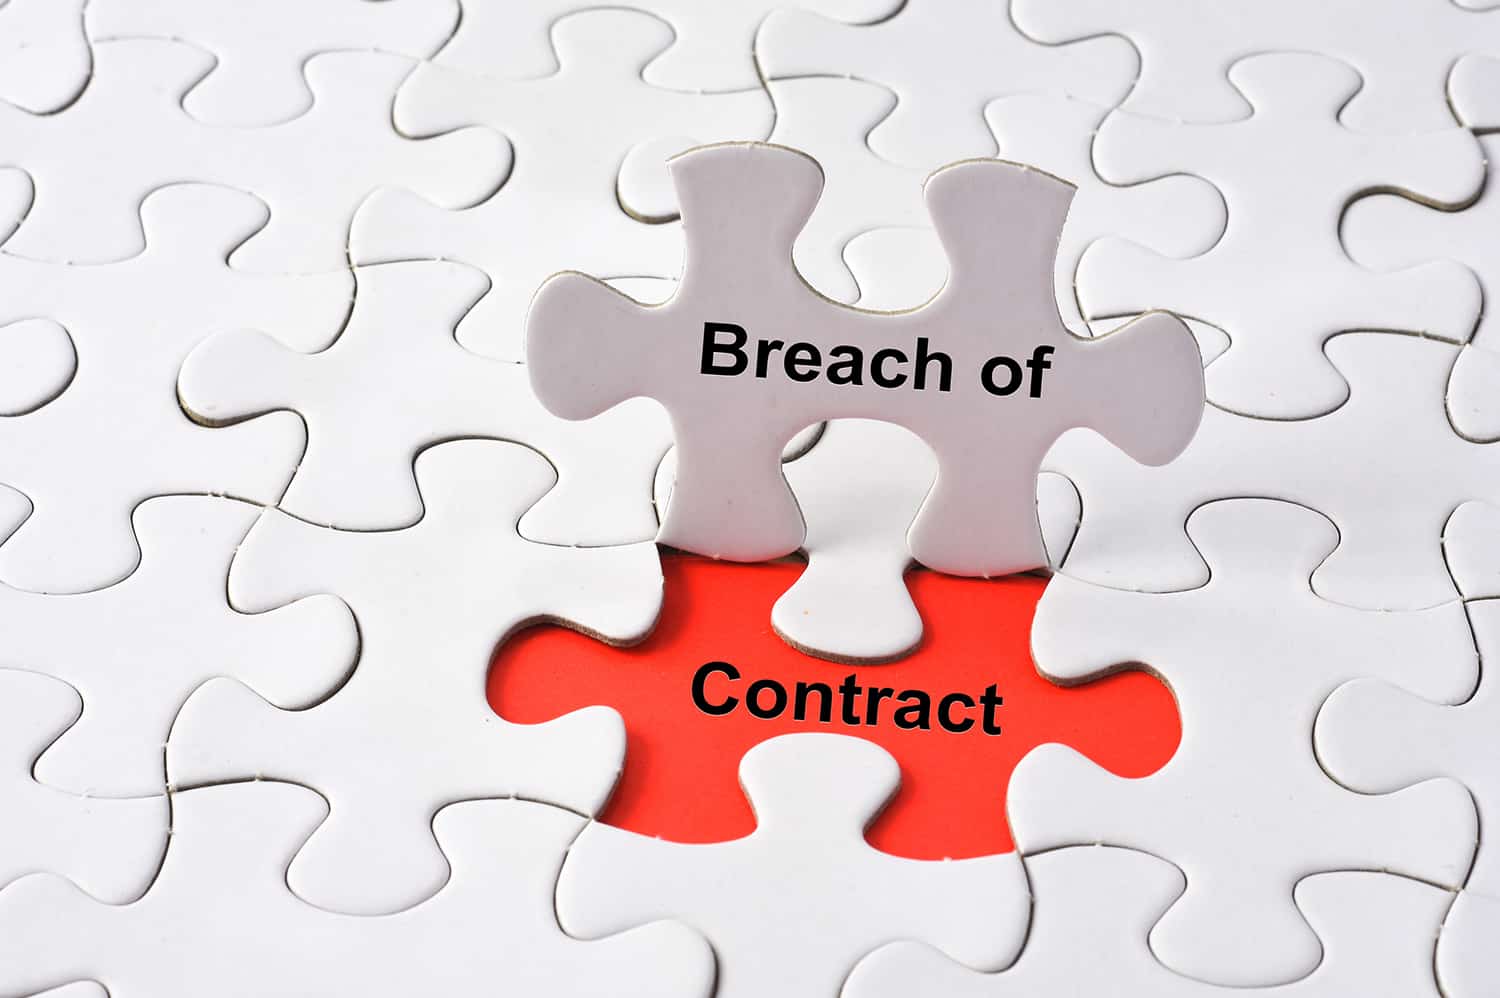 Resolving a Breach of Contract Can Take a Number of Twists and Turns